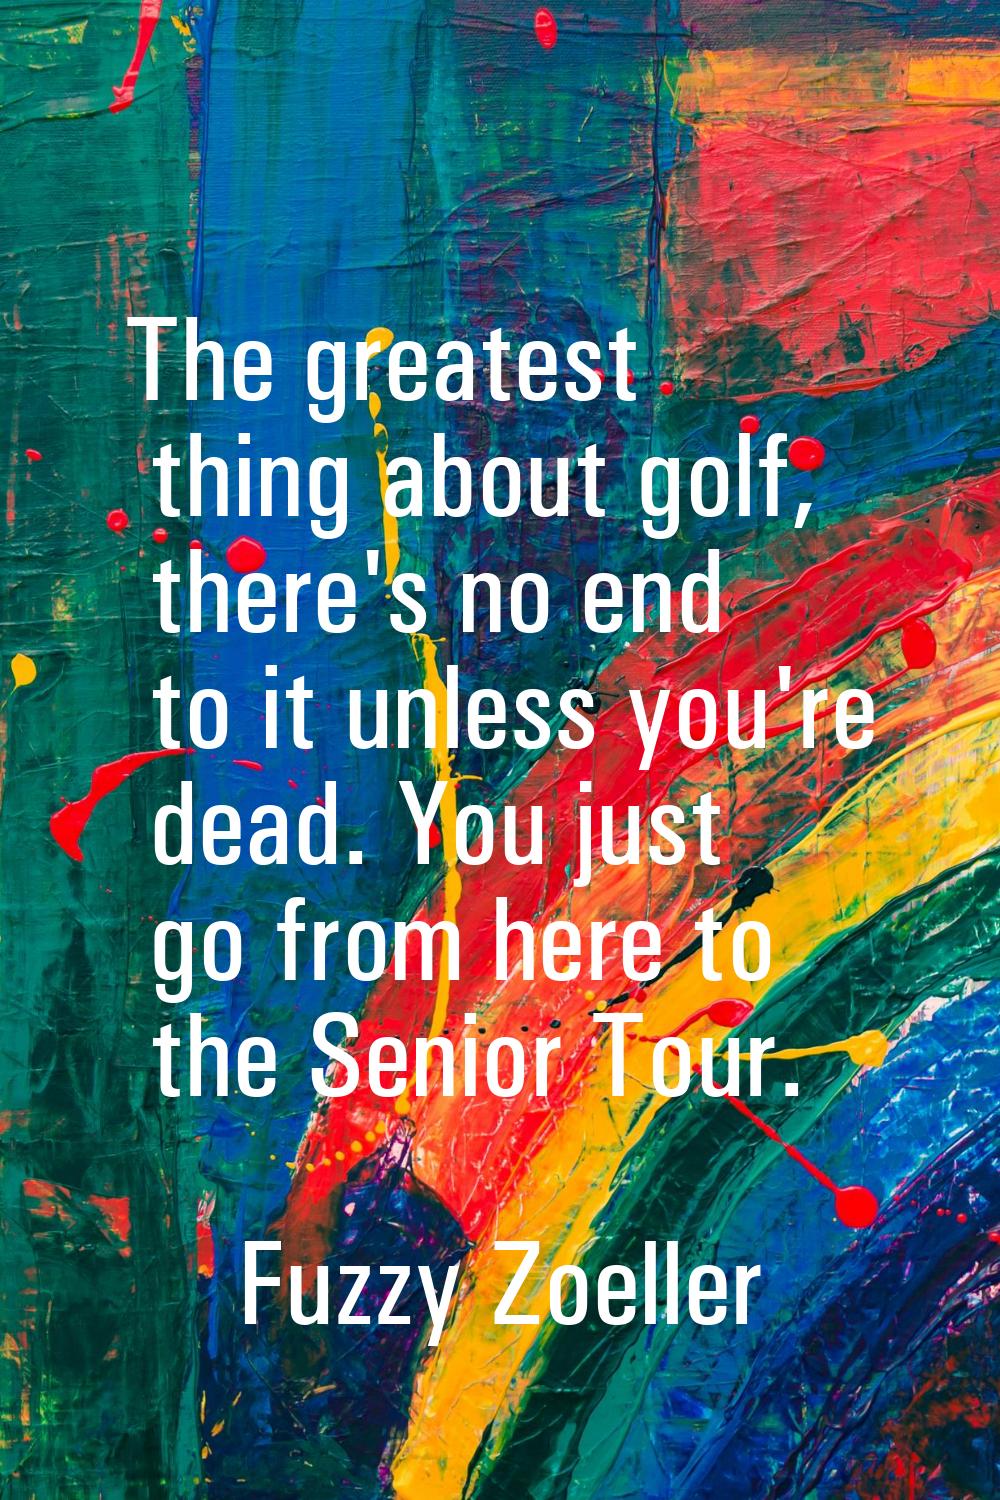 The greatest thing about golf, there's no end to it unless you're dead. You just go from here to th